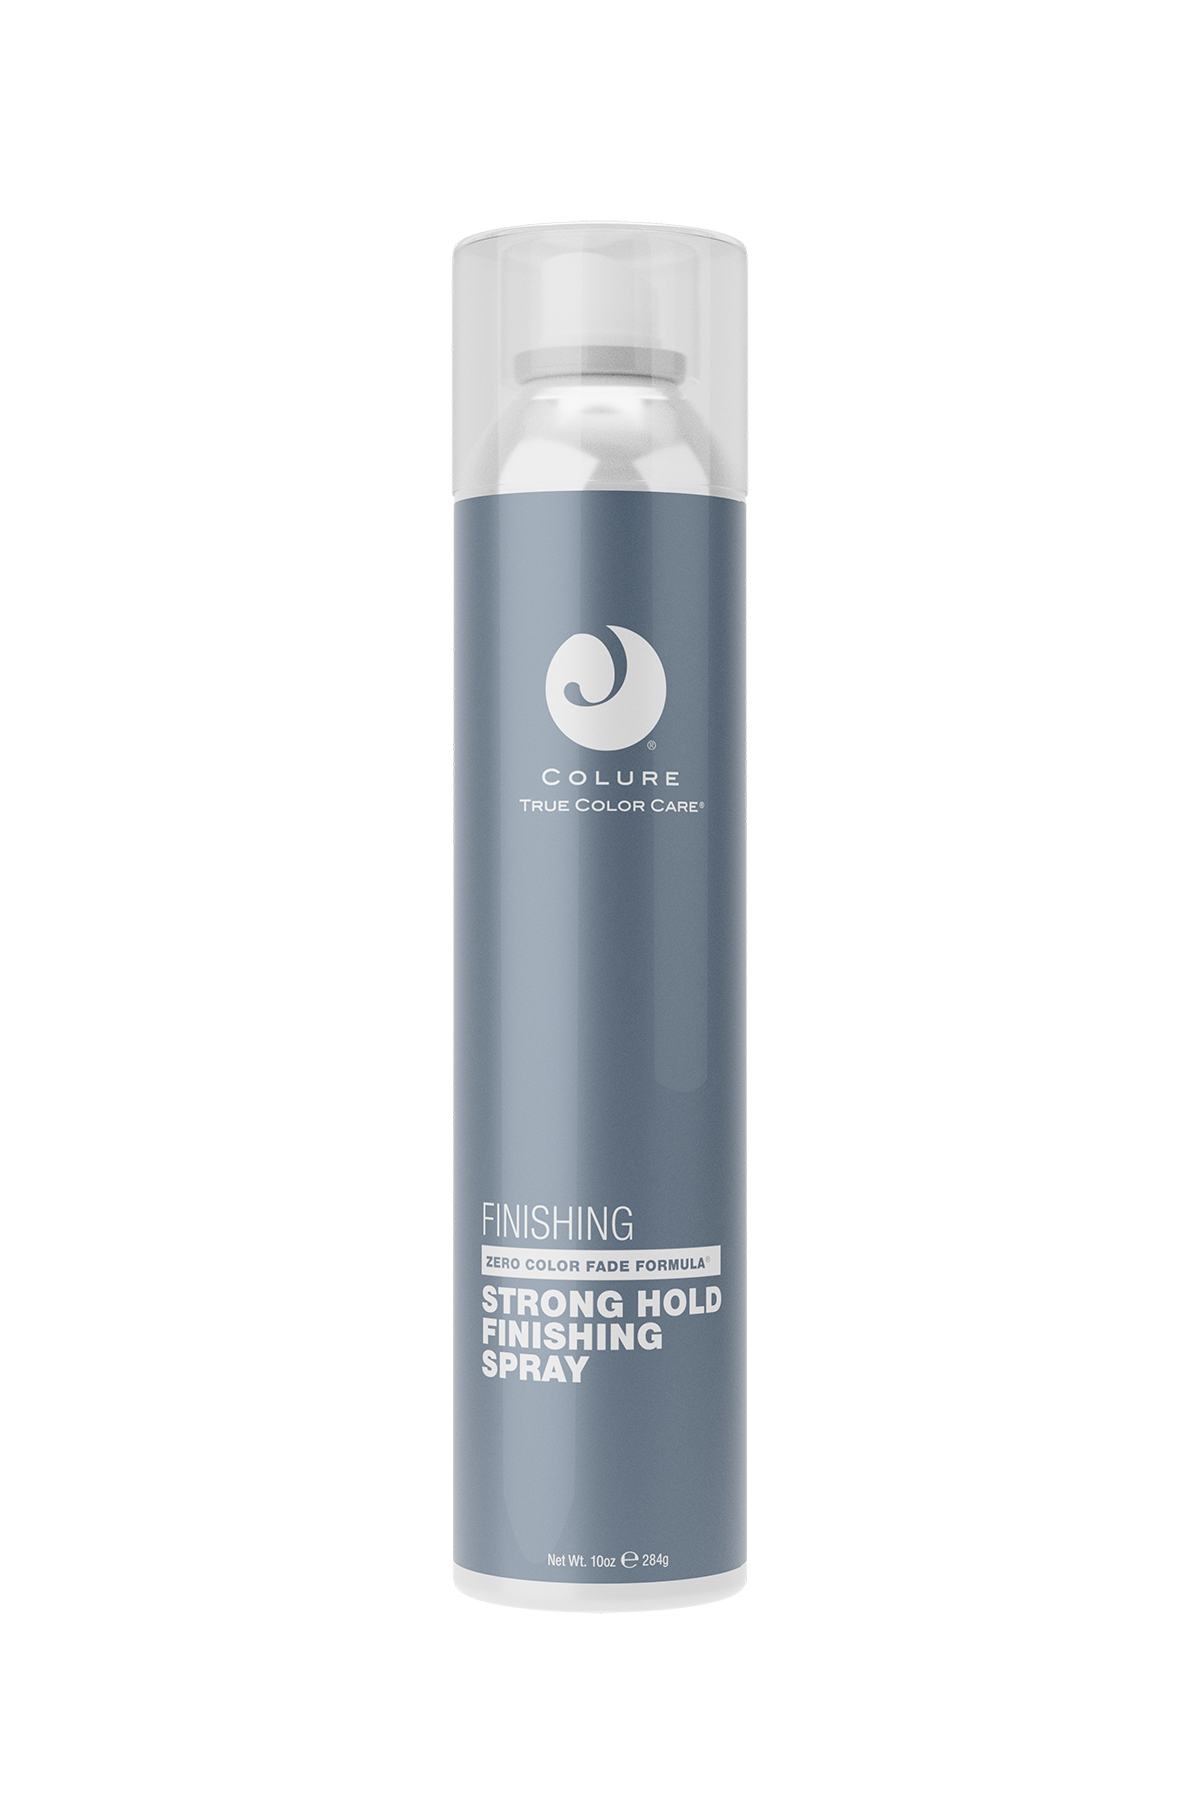 Strong Hold Finishing Spray - Colure Hair Care